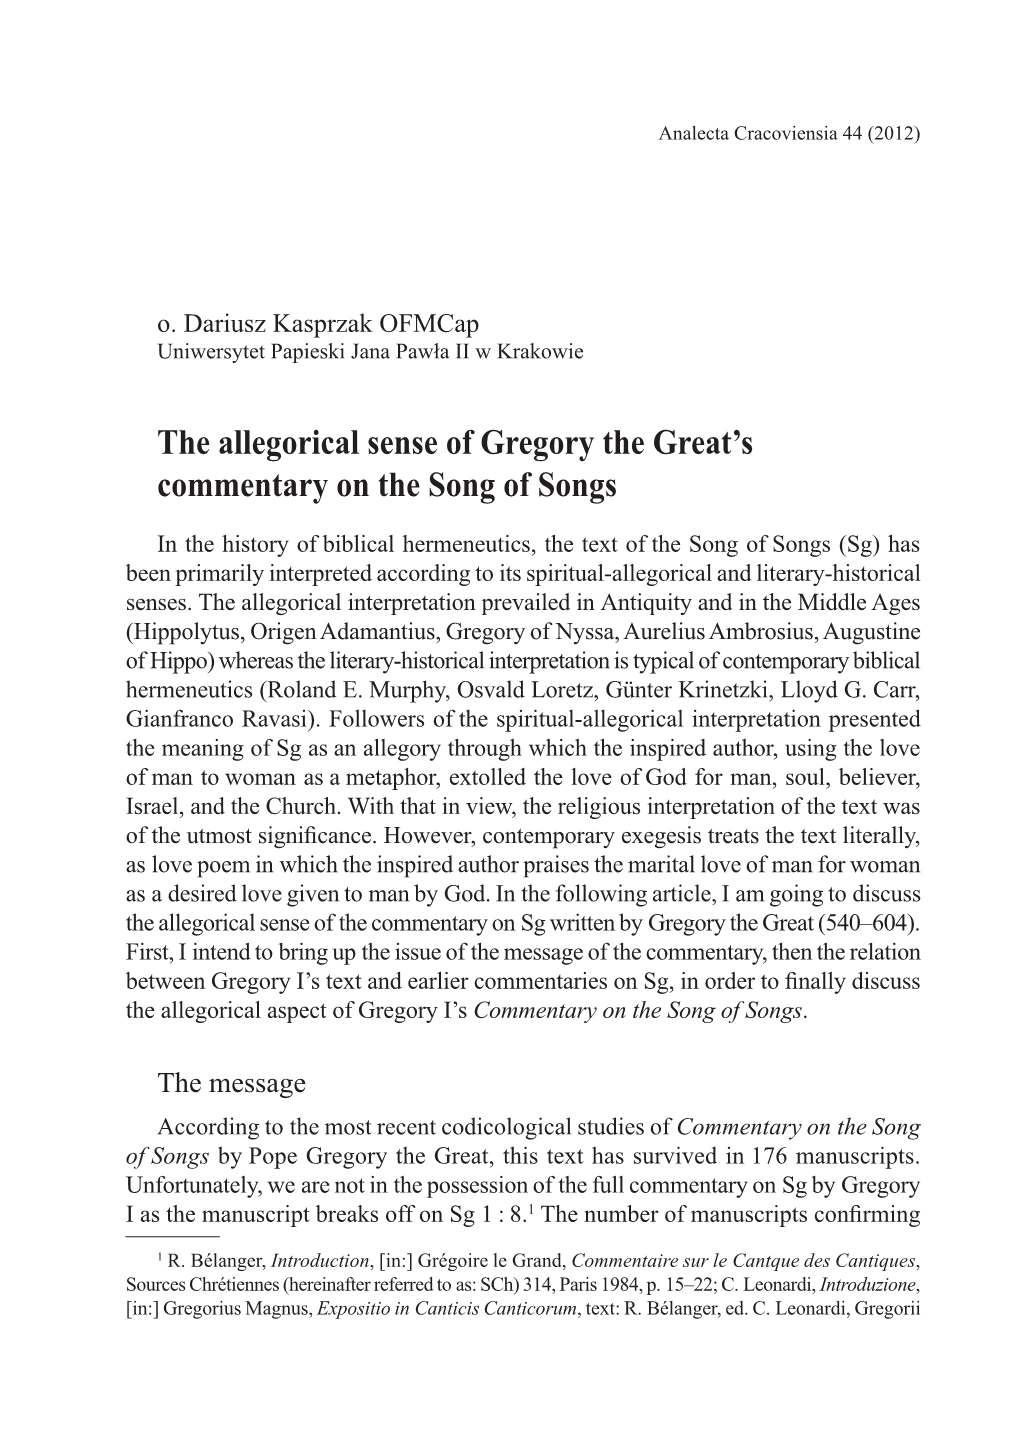 The Allegorical Sense of Gregory the Great's Commentary on The